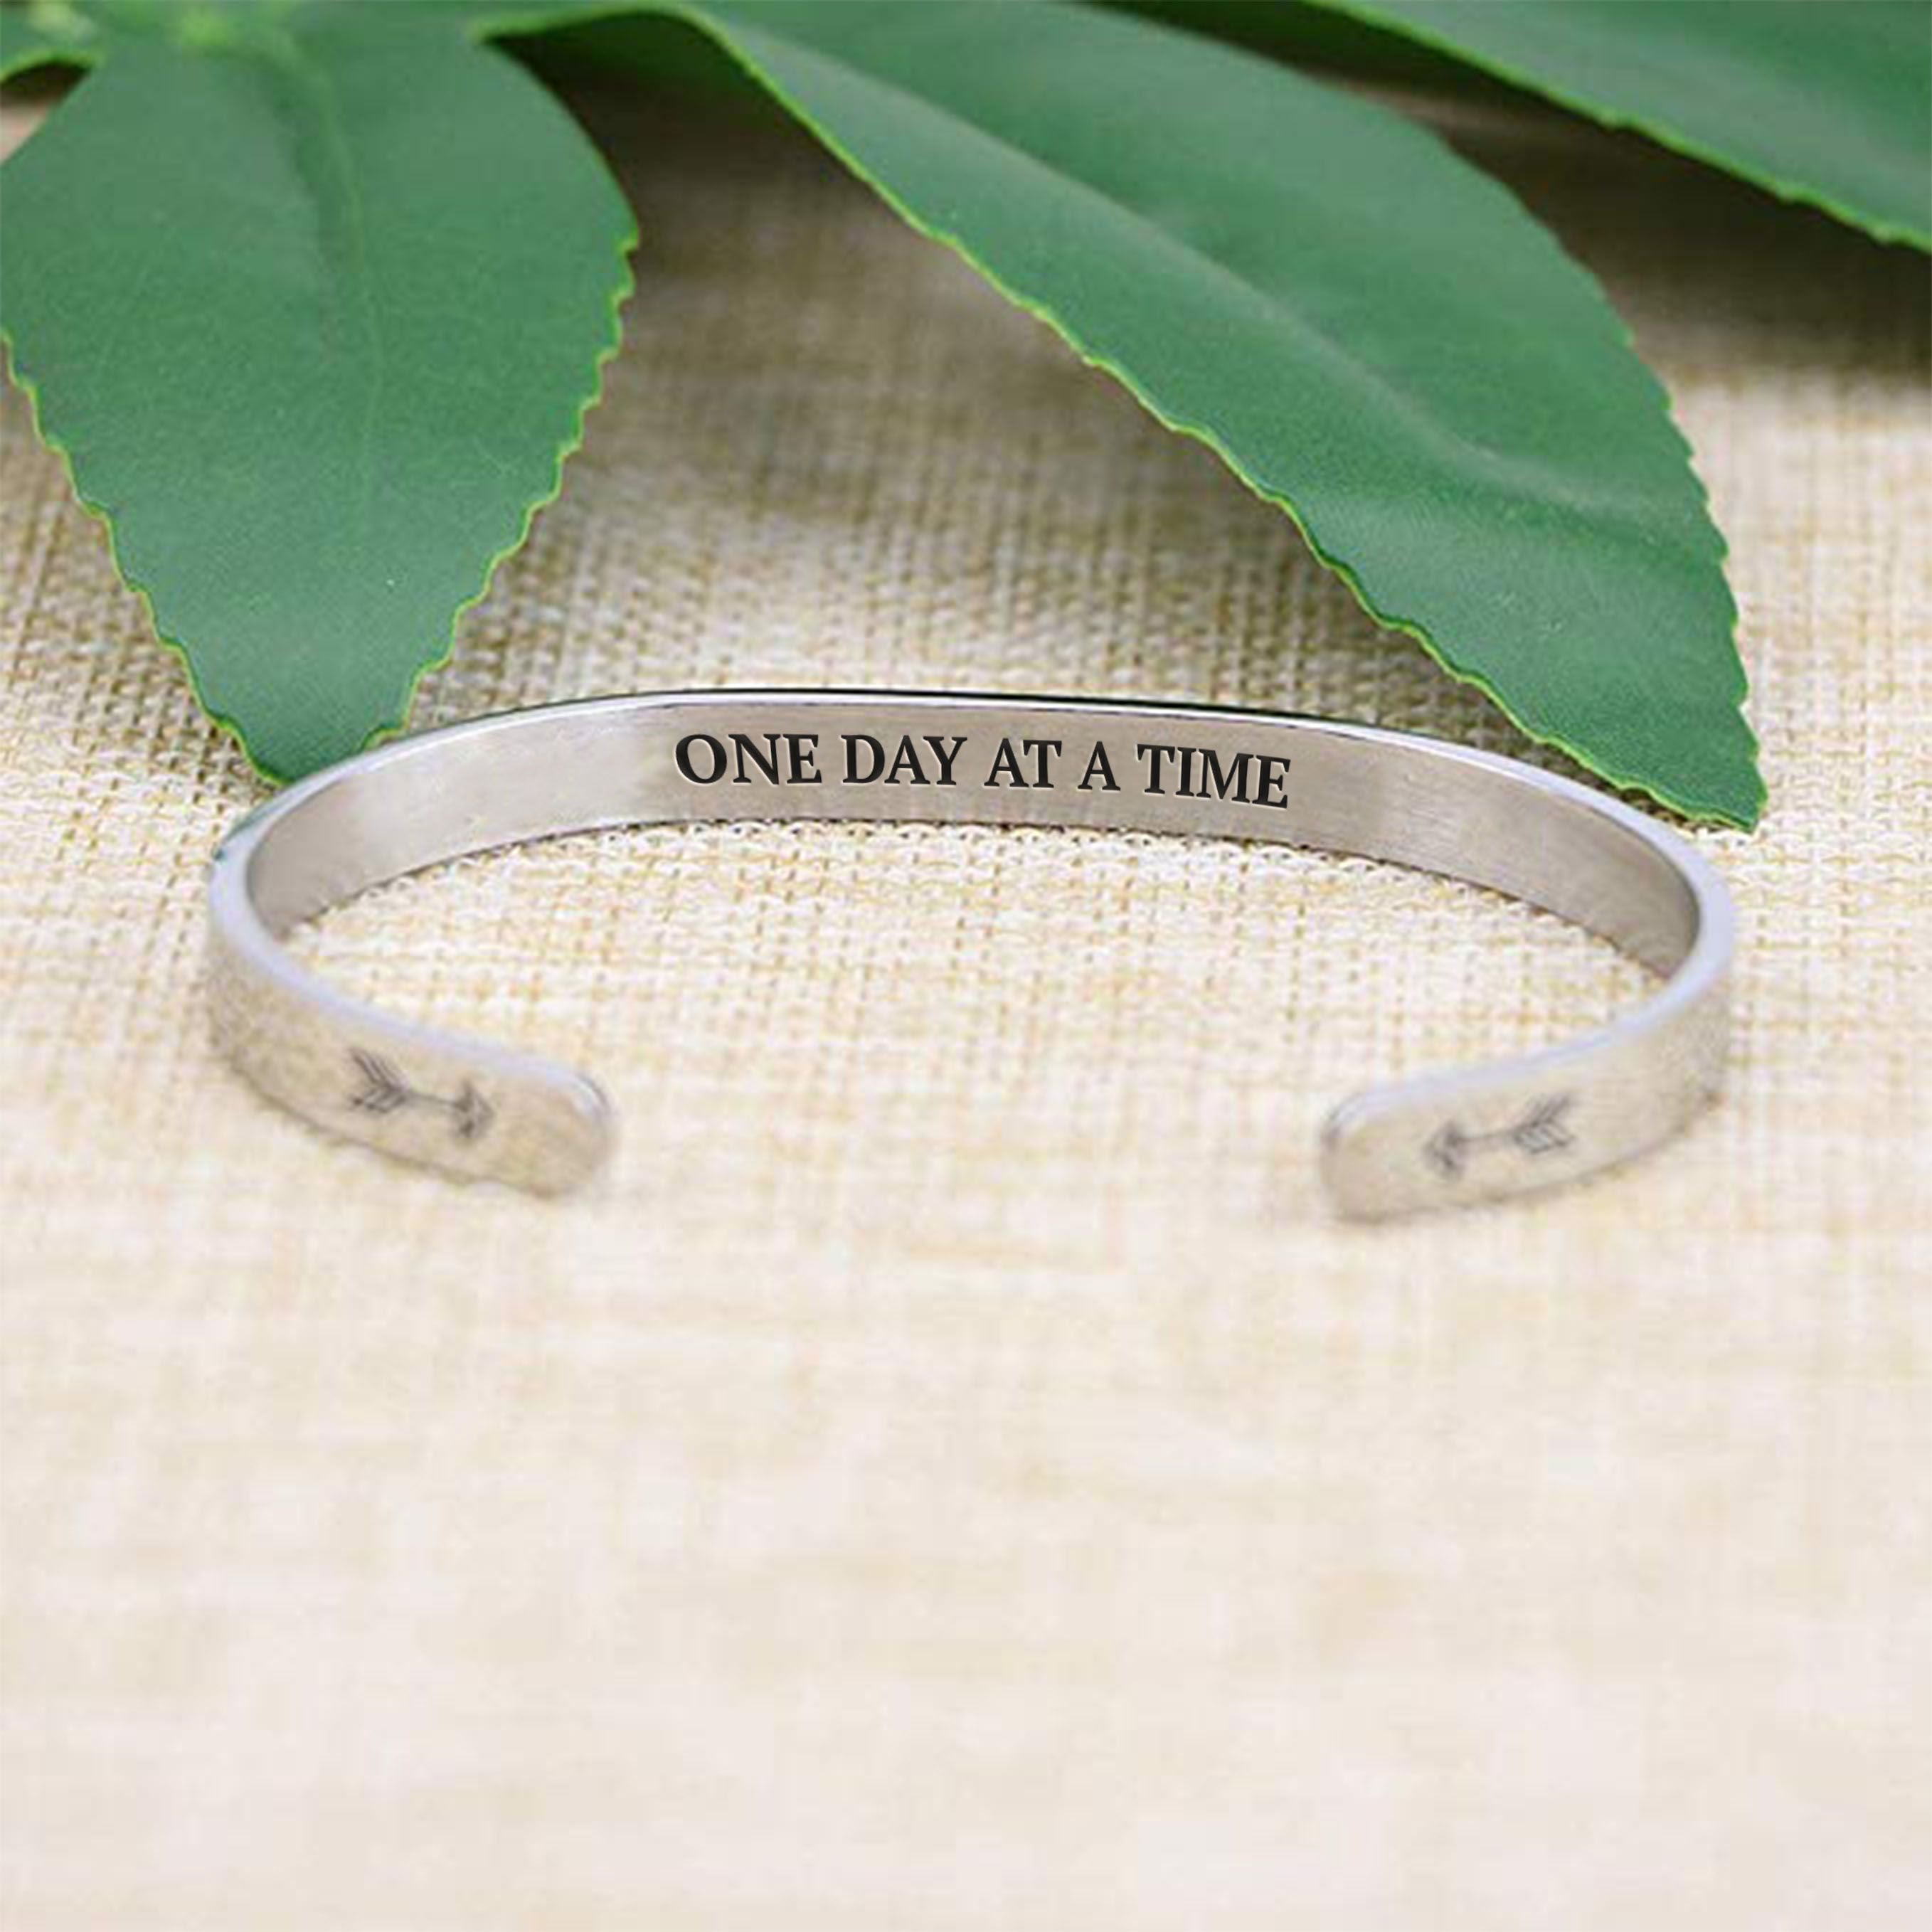 One day at a time bracelet with silver plating with message in focus on a burlap surface with a leafy background